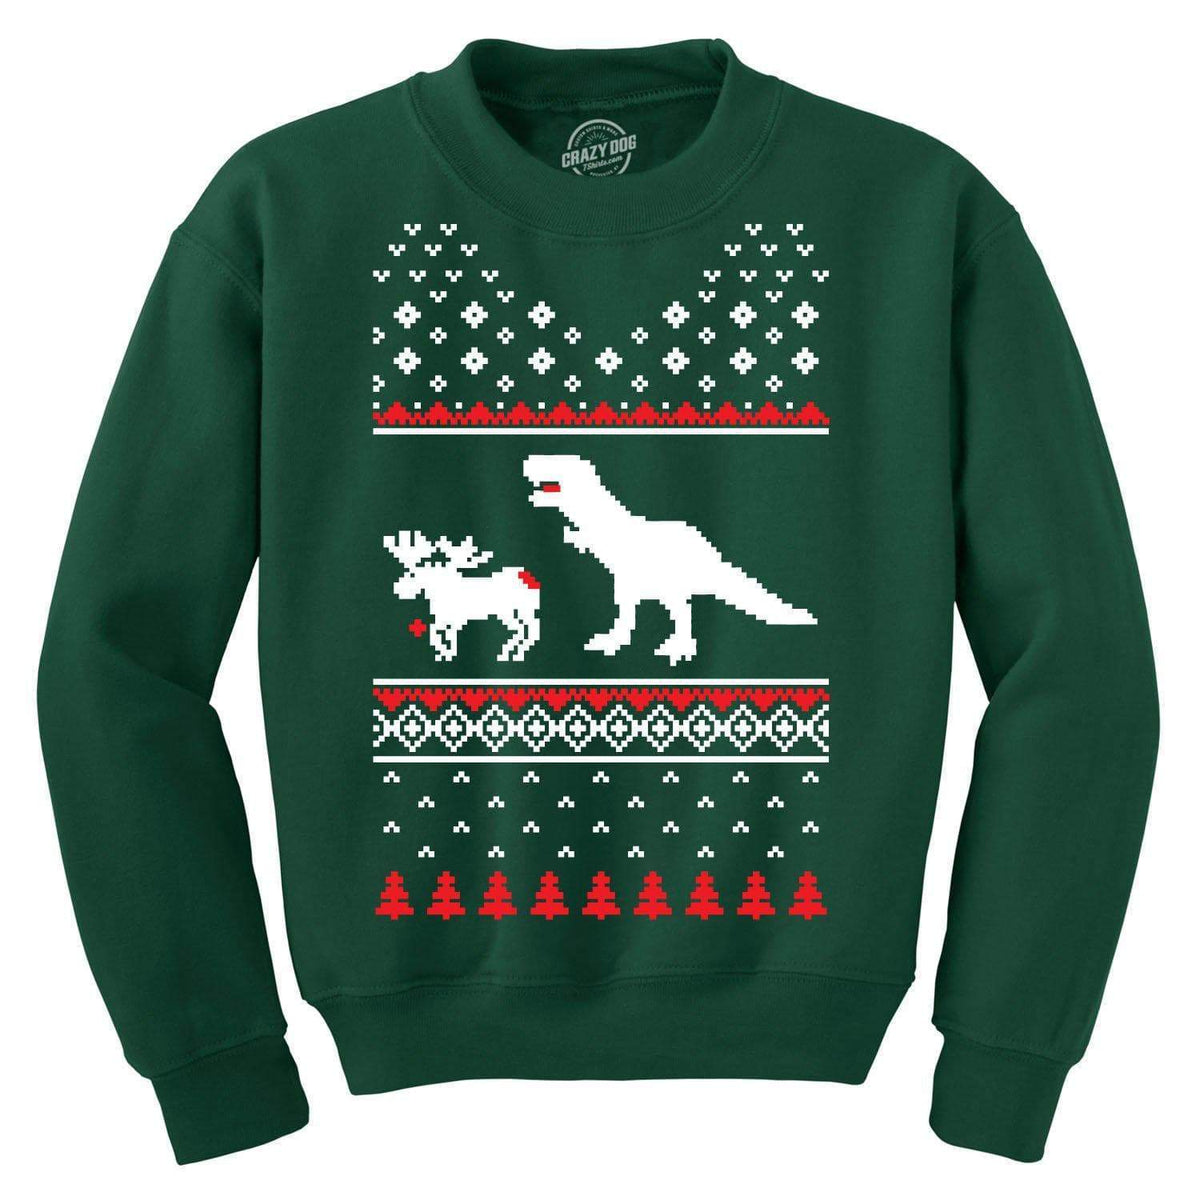 T-Rex Attack Christmas Ugly Sweater Crew Neck Sweatshirt - Crazy Dog T-Shirts